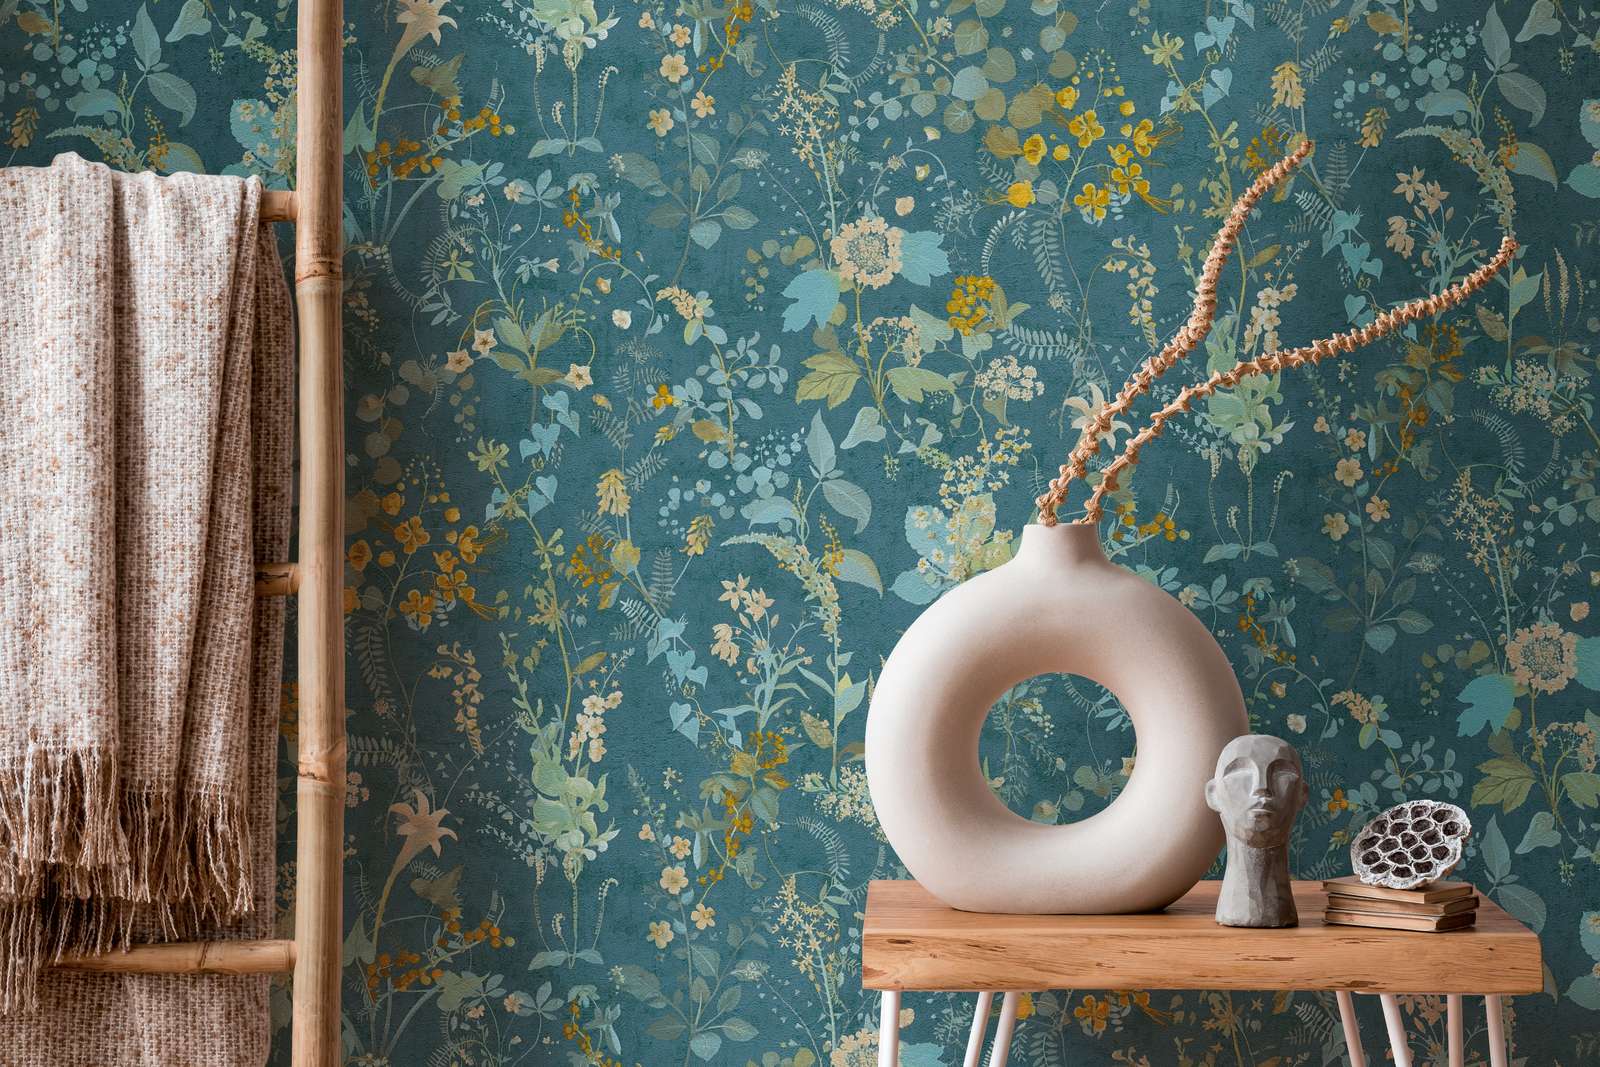             Floral wallpaper petrol with floral pattern - green, yellow
        